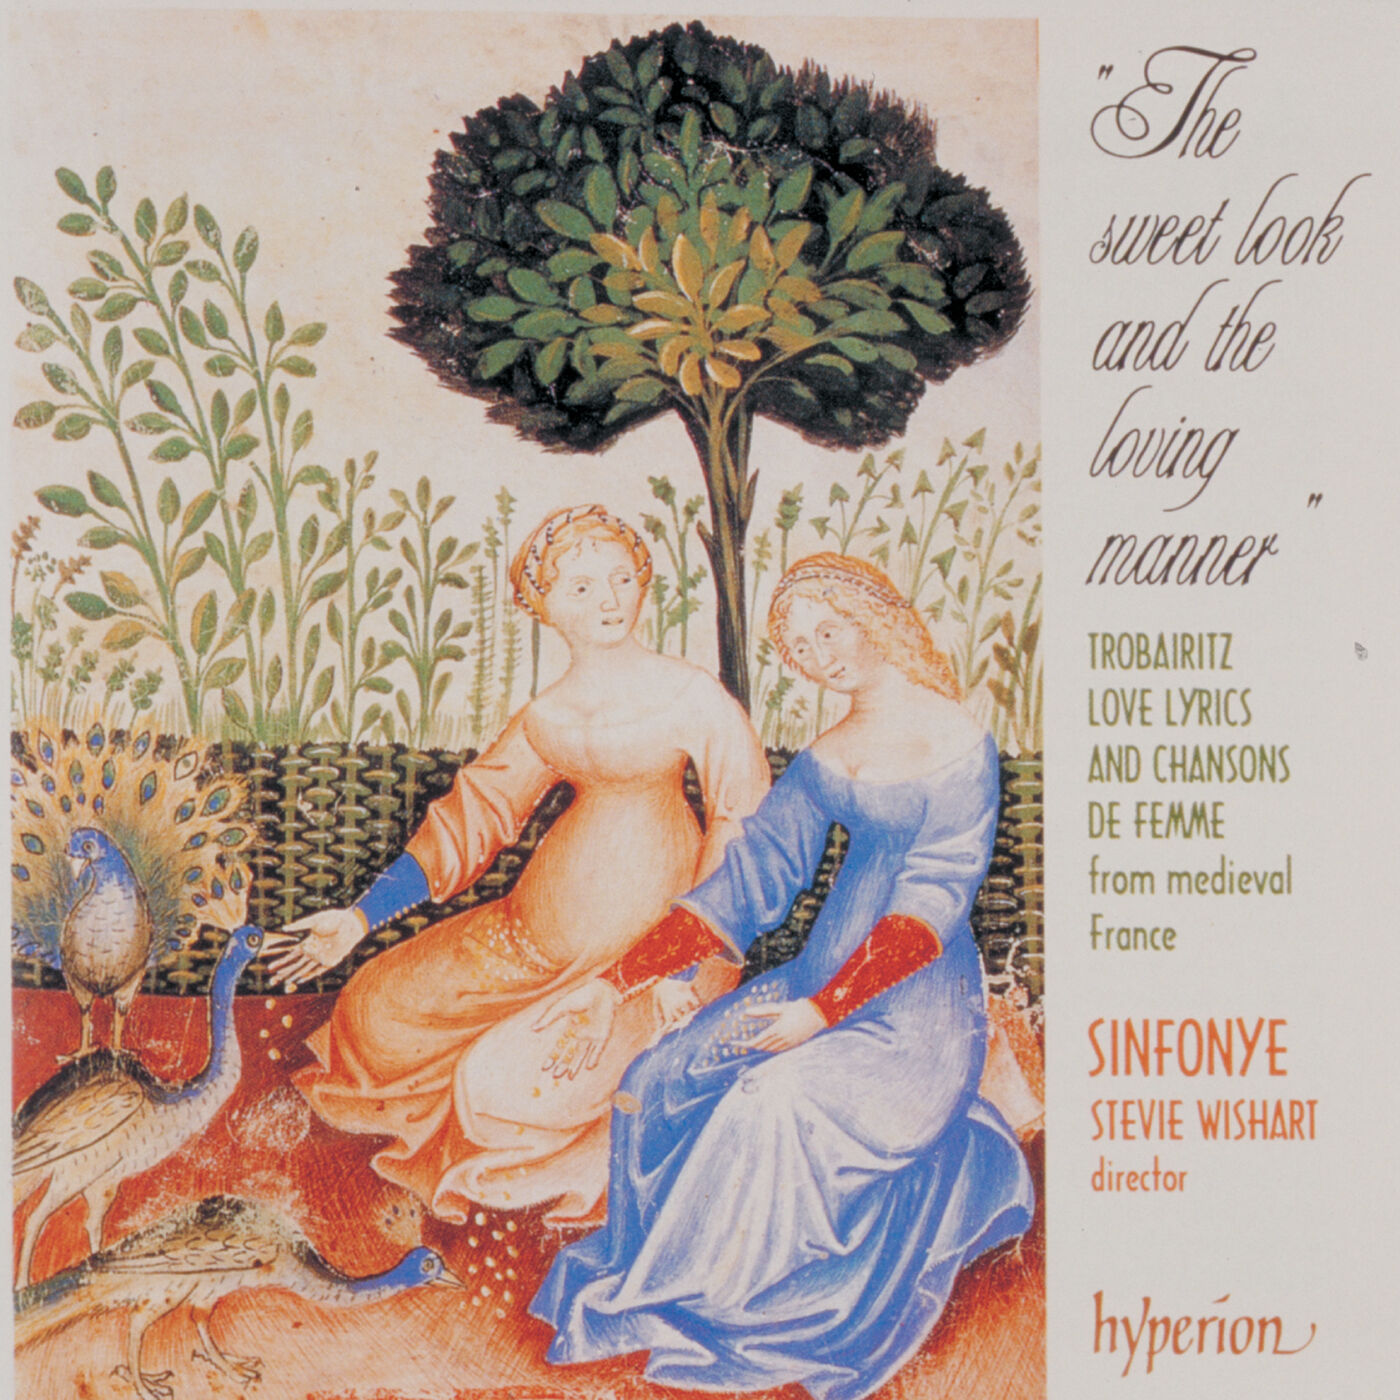 Ens. Sinfonye - The Sweet Look and the Loving Manner- Music of Medieval Provence